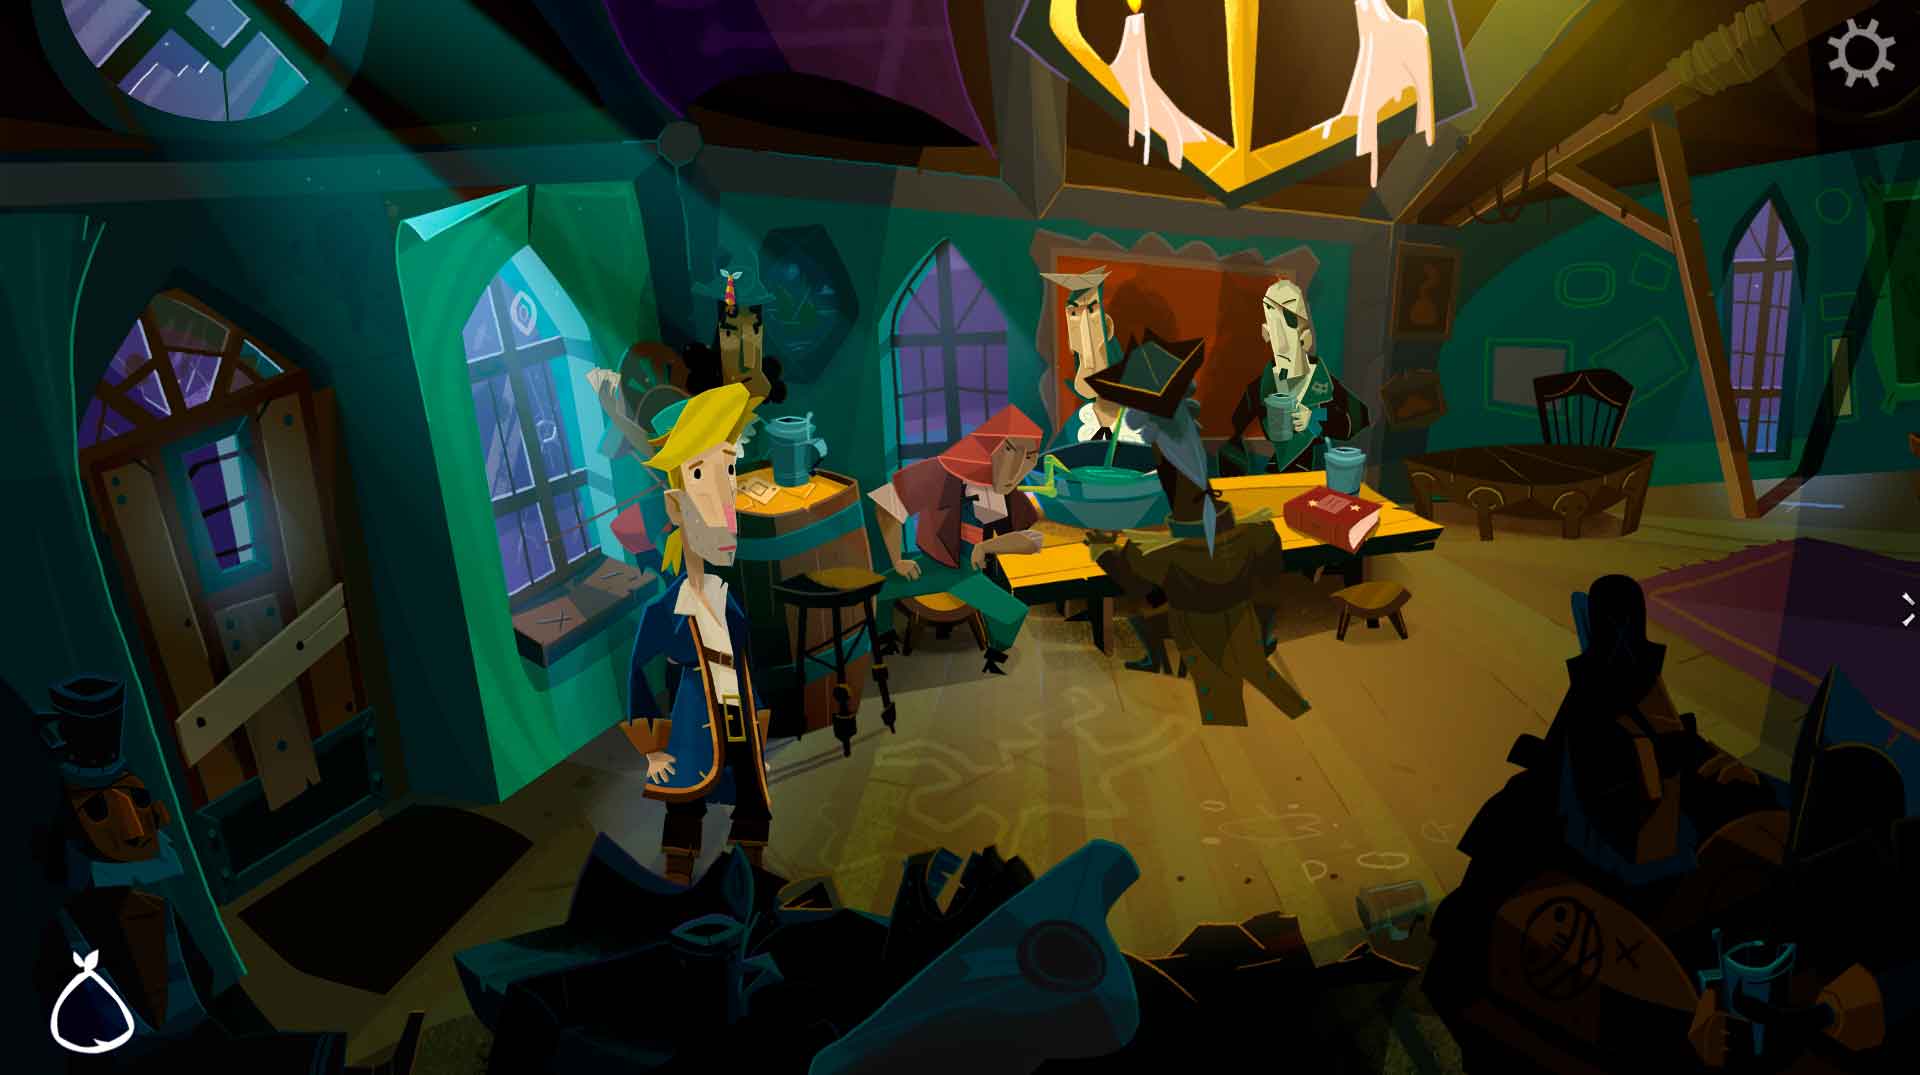 Analysis: Return to Monkey Island is coming home